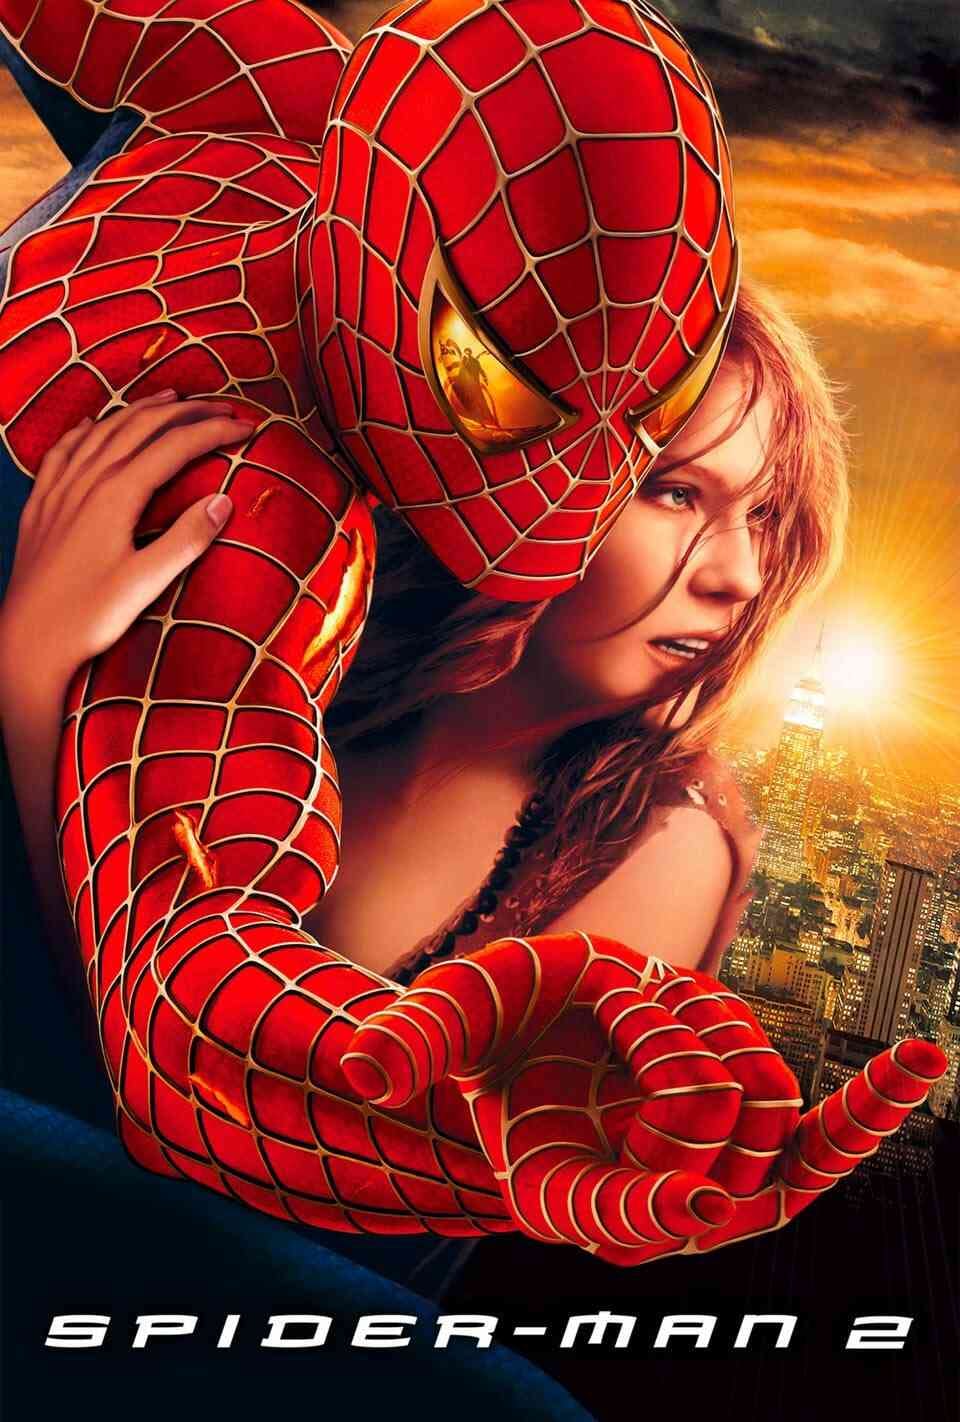 Read Spider-Man 2 screenplay (poster)